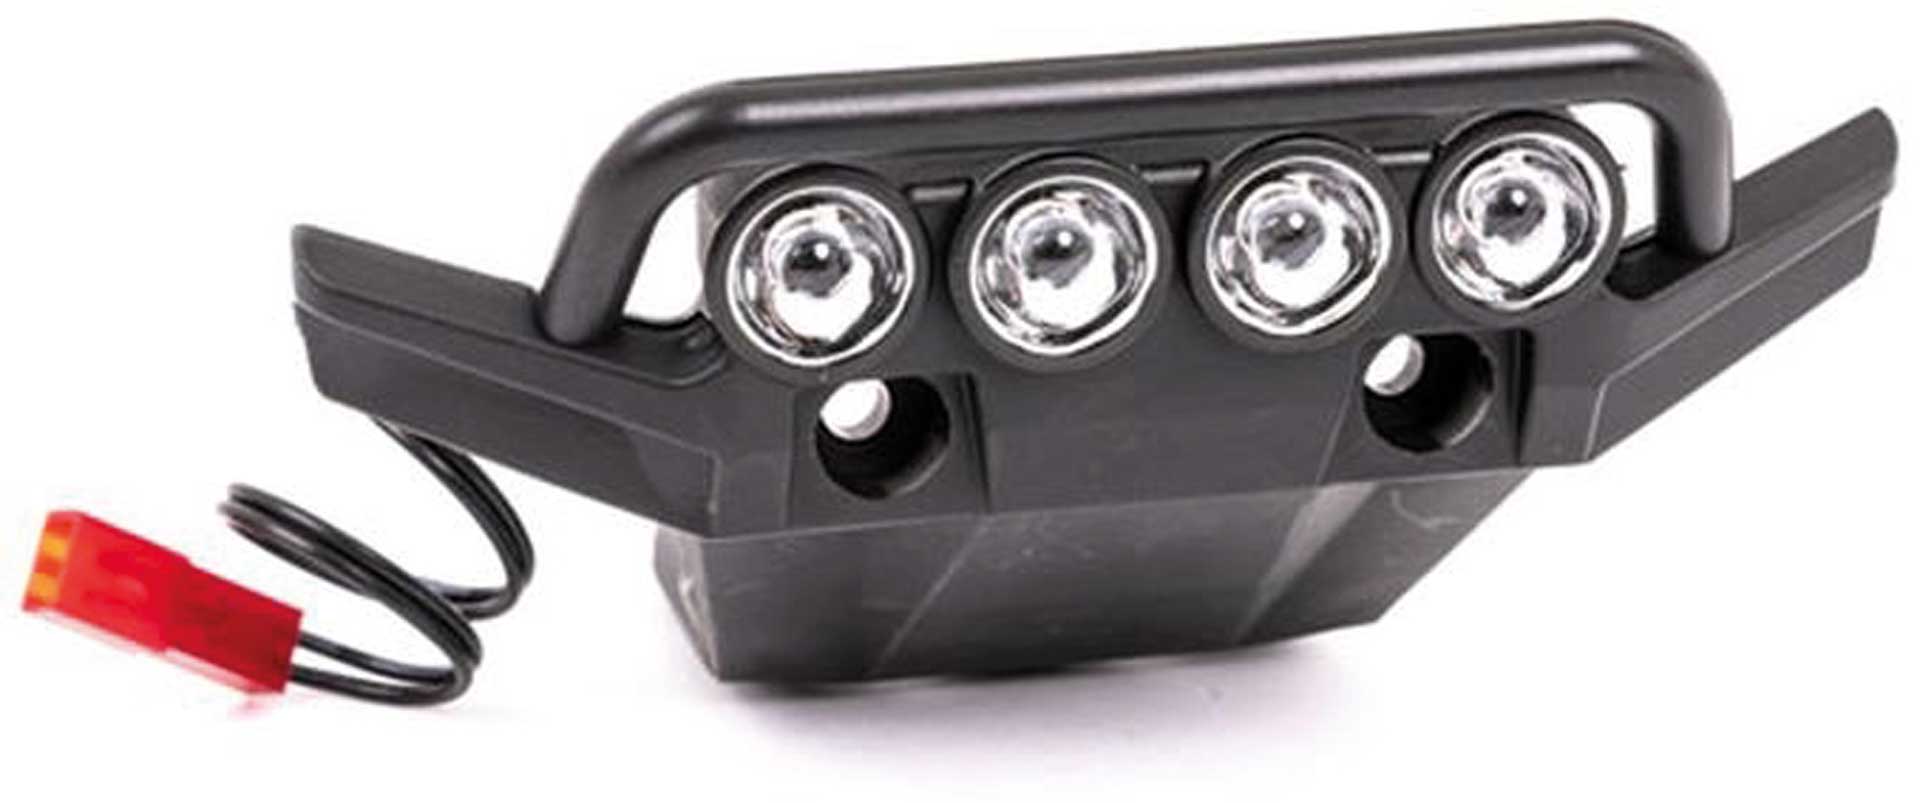 TRAXXAS BUMPER + FRONT BRACKET WITH LED LIGHT MOUNTING 4WD RUSTLER